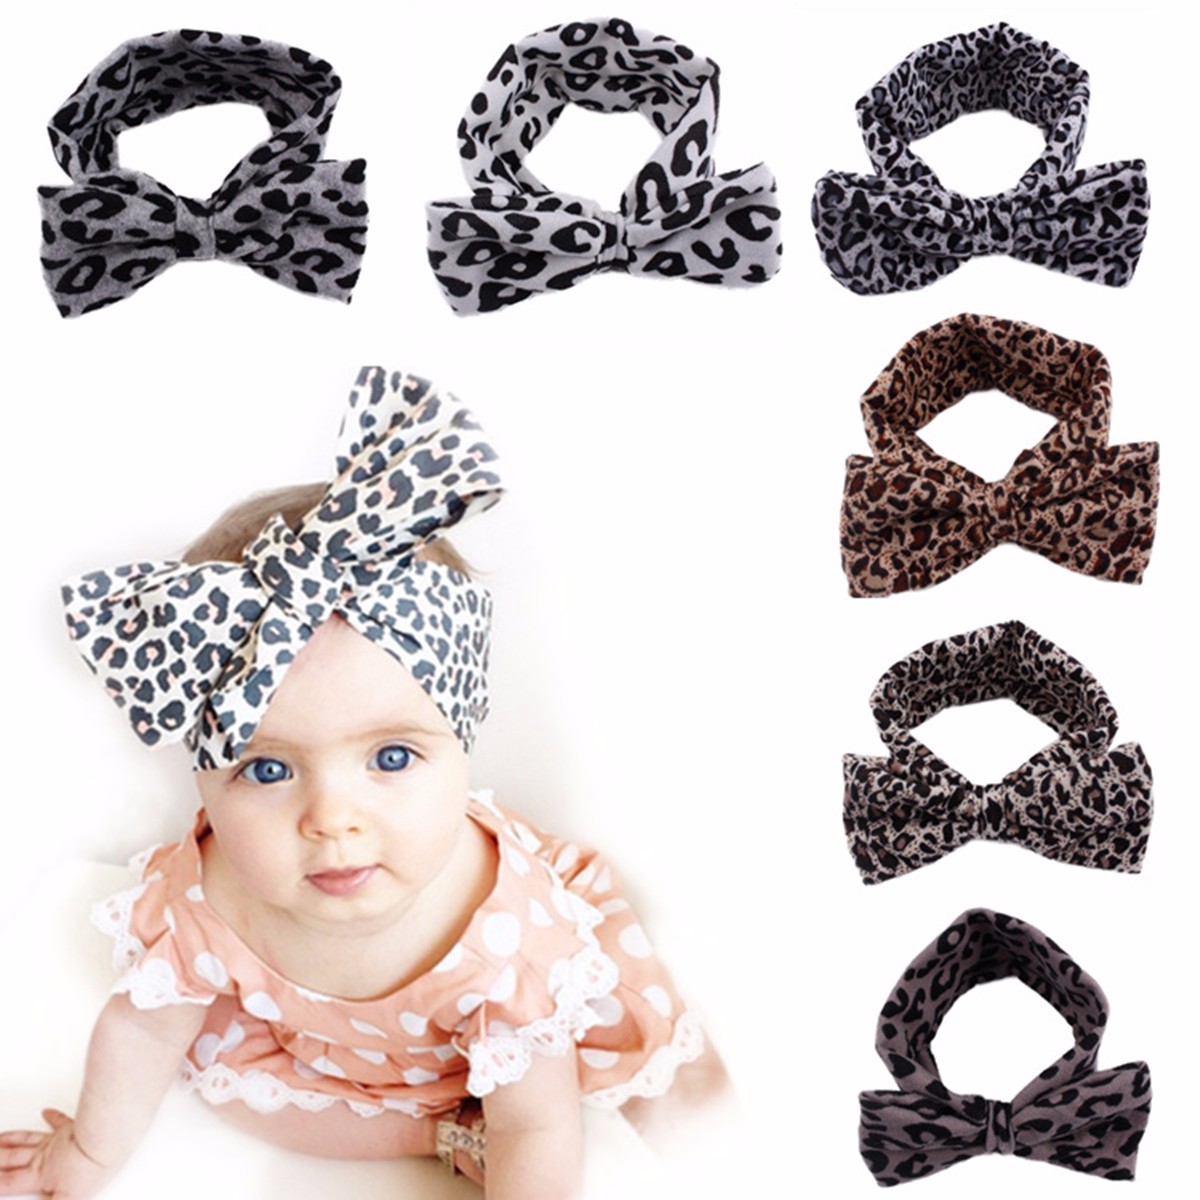 Toddler-Baby-Infants-kid-Girl-Leopard-Floral-Bow-Knot-Headbrand-Elastic-Stretch-Hair-Band-Accessorie-1029768